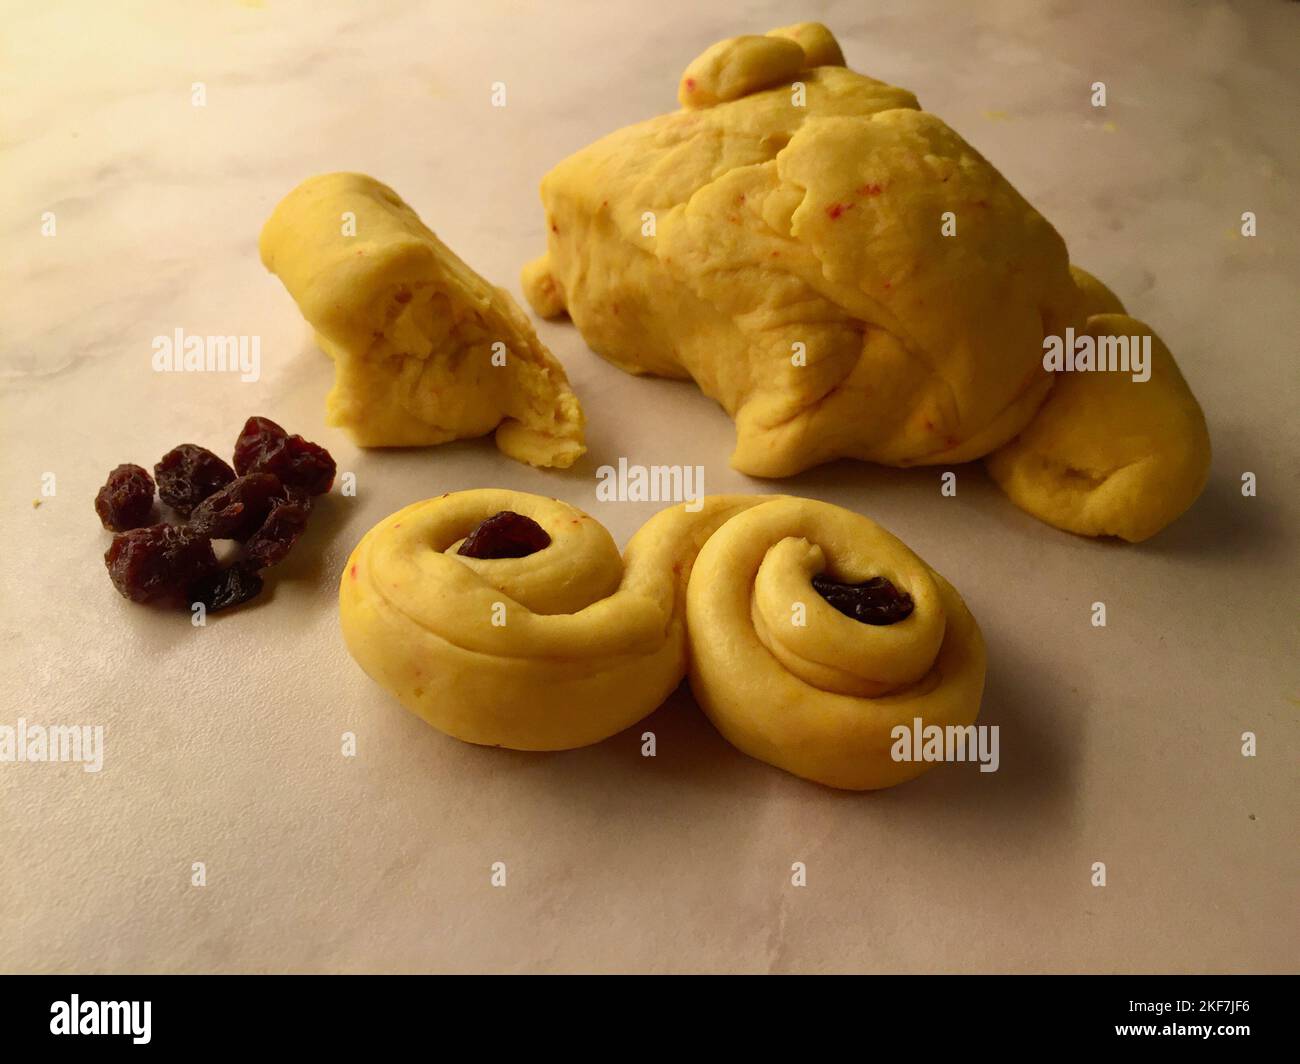 Saffron dough and raisins on a baking table for baking buns for December holidays. Stock Photo